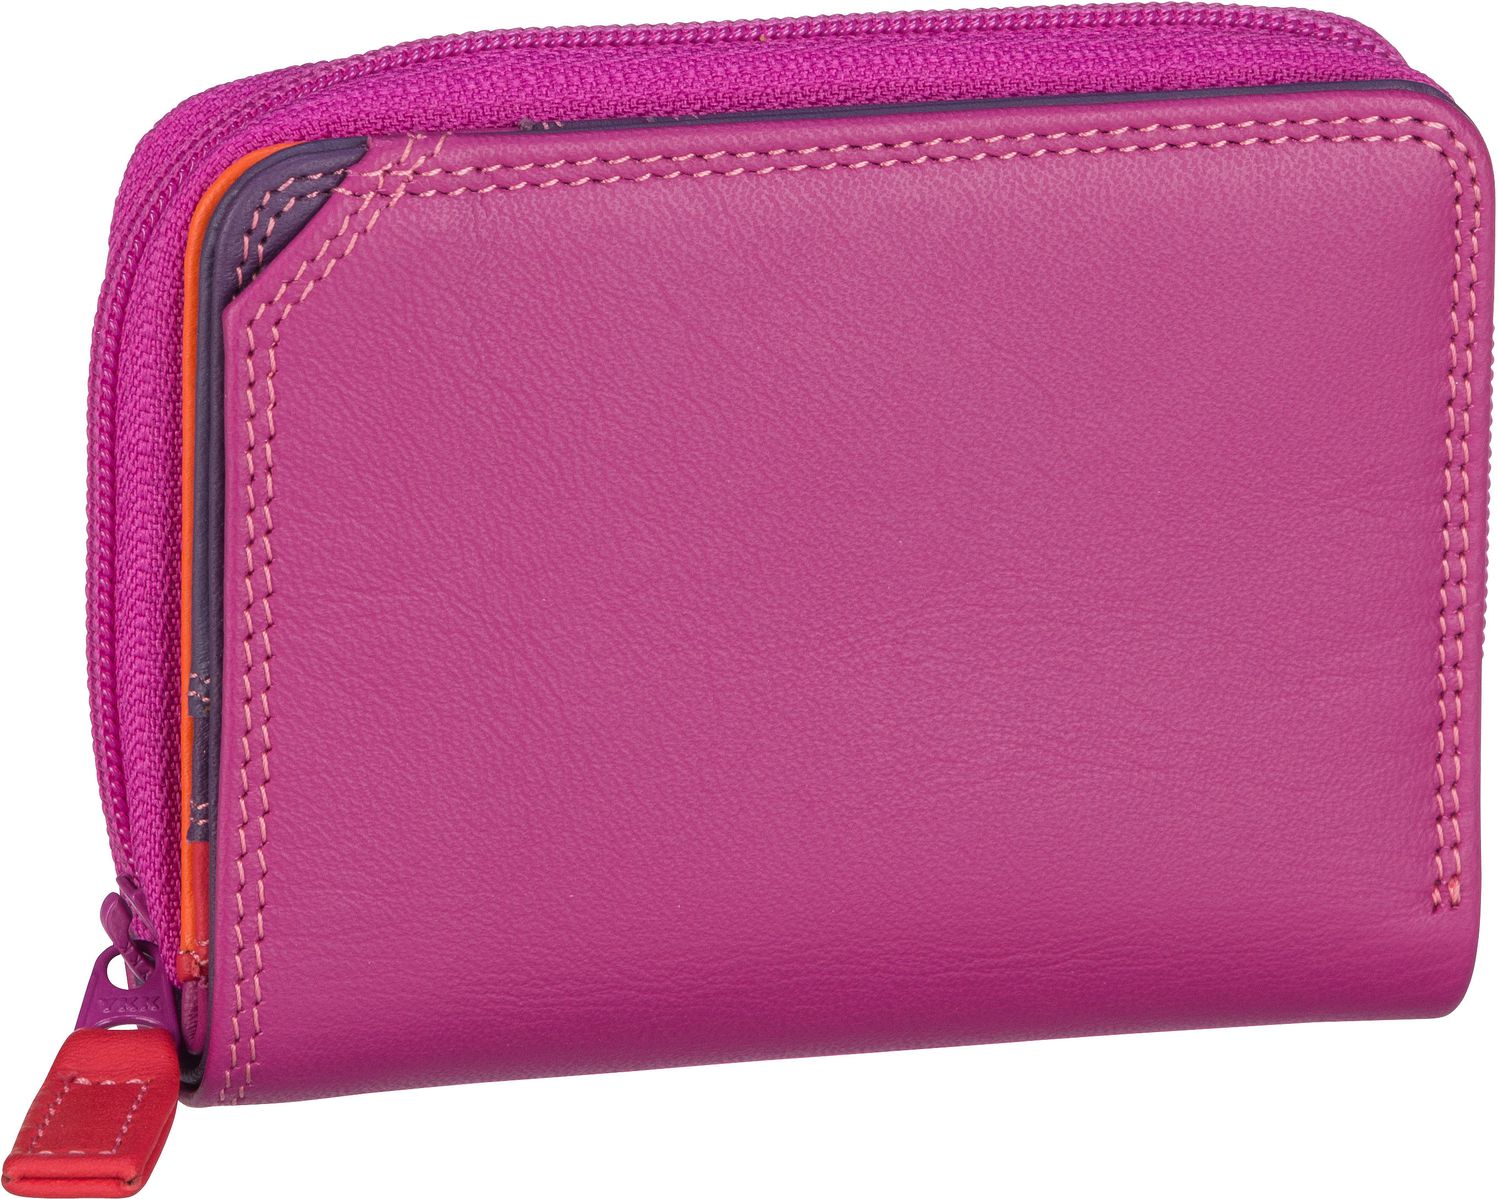 Mywalit Small Wallet w/Zip Around Purse - Sangria Multi